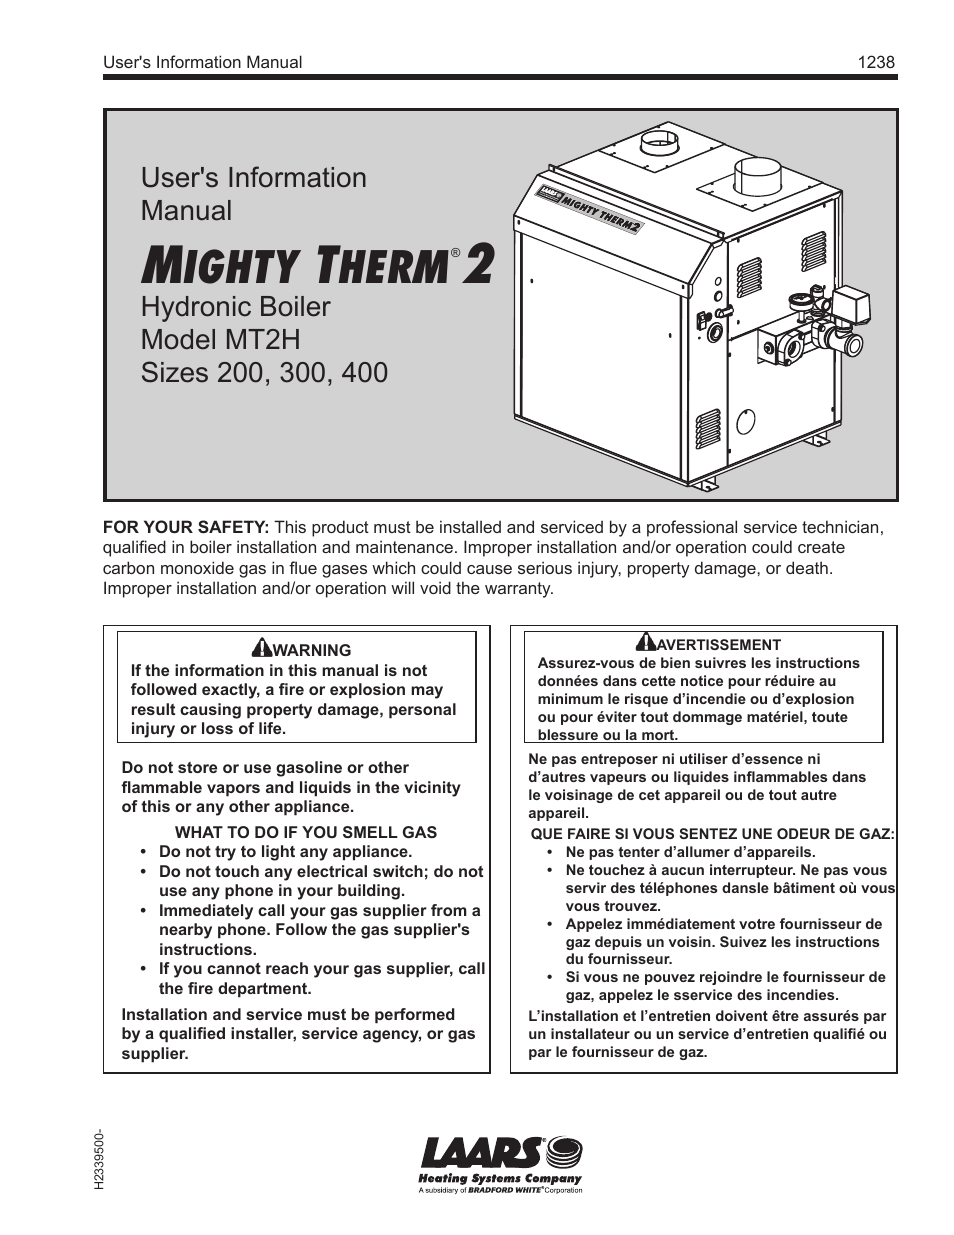 Mighty Therm2 MT2H (Sizes 200, 300, 400) - Users Manual